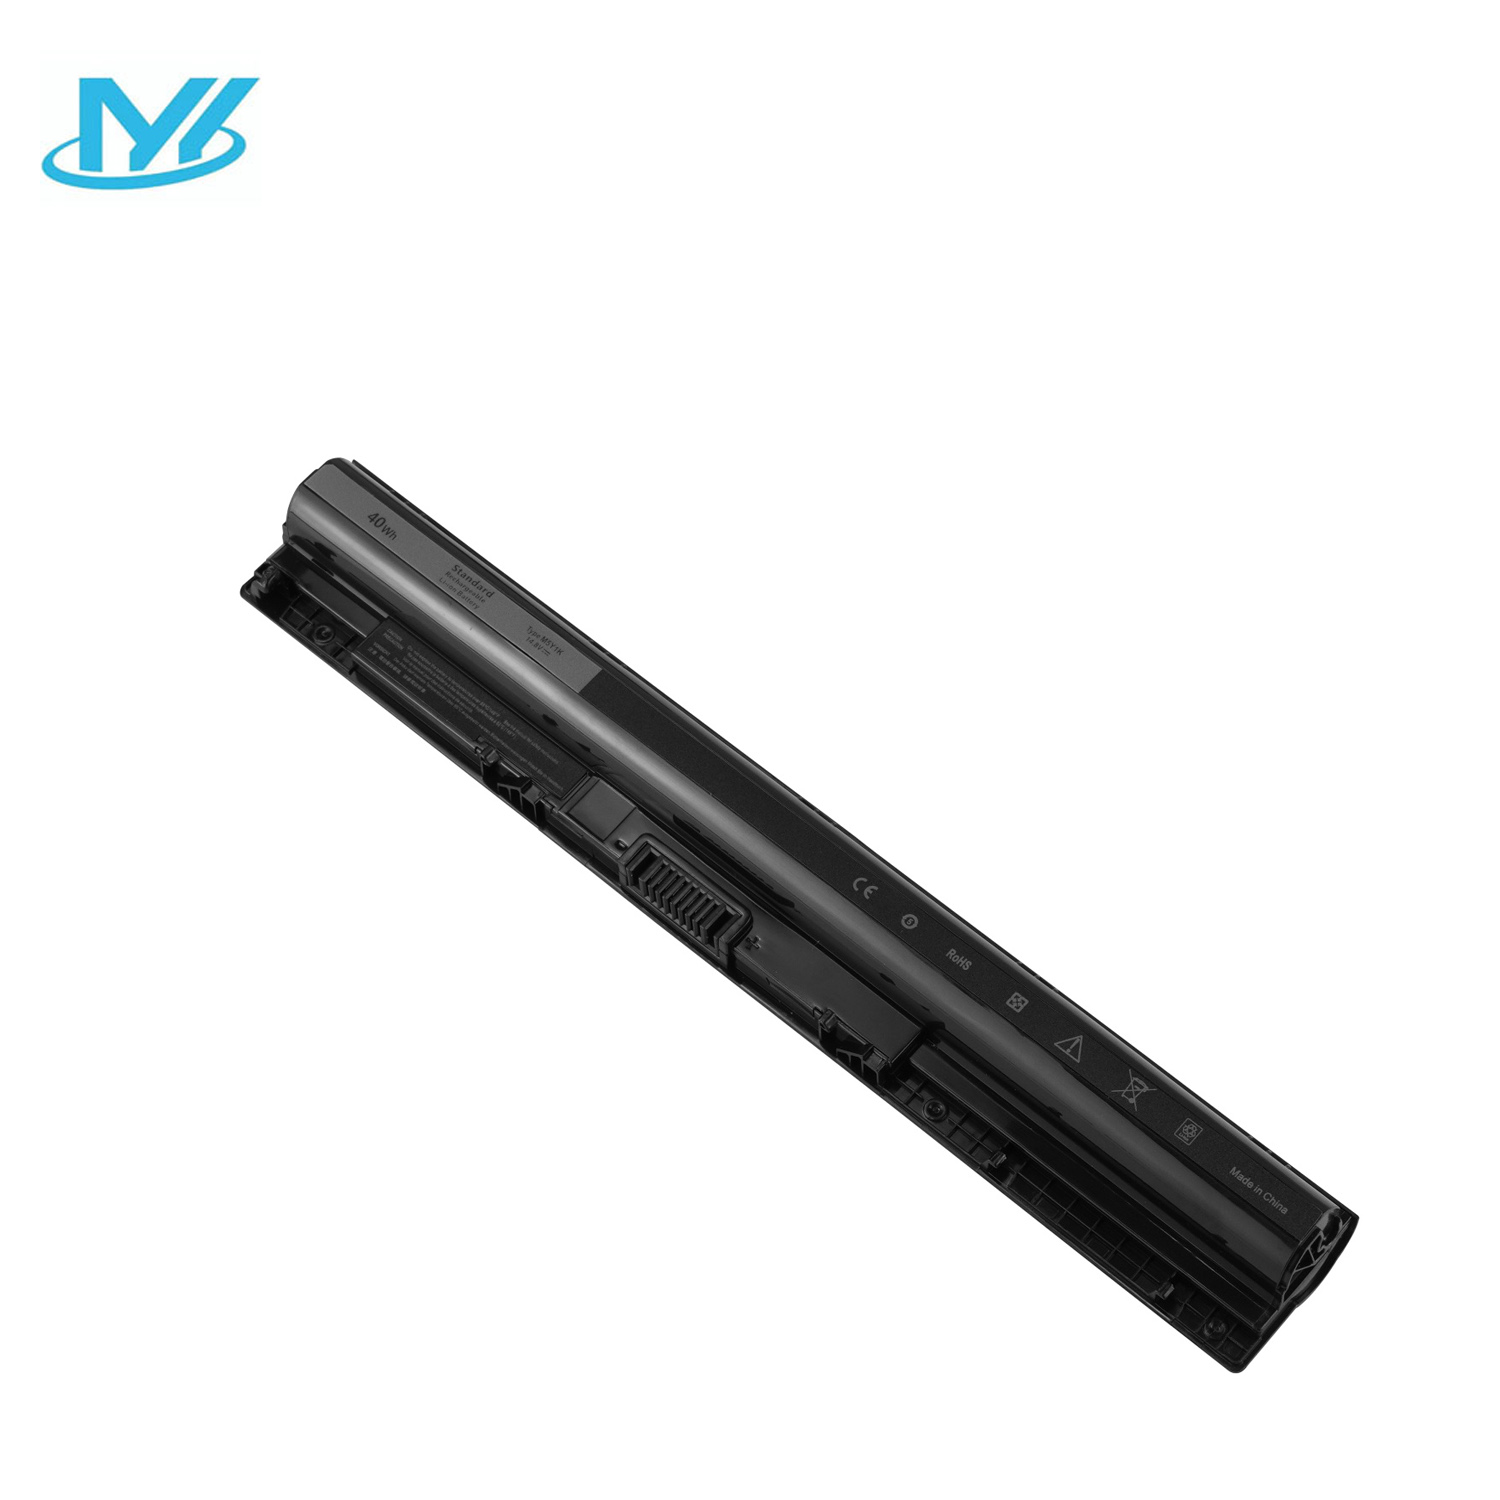 M5Y1K rechargeable lithium ion laptop Battery 14.8V 33Wh GXVJ3 HD4J0 K185W WKRJ2 OVN3N0 for Dell laptop Inspiron 3451 3551 5558 5758 14 15 3000 Vostro 3458 3558